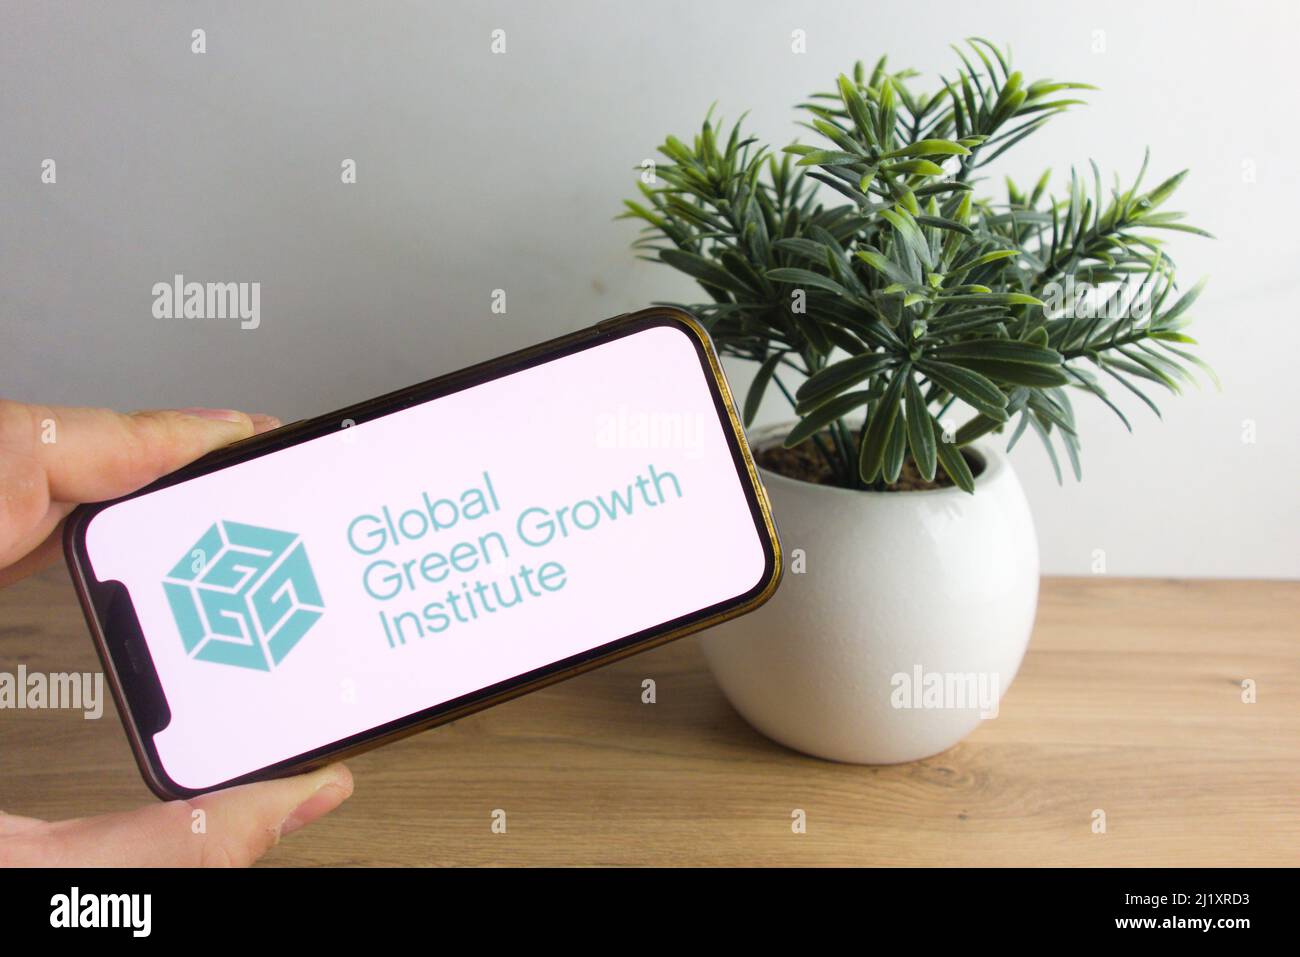 KONSKIE, POLAND - March 26, 2022: GGGI - Global Green Growth Institute logo displayed on mobile phone Stock Photo